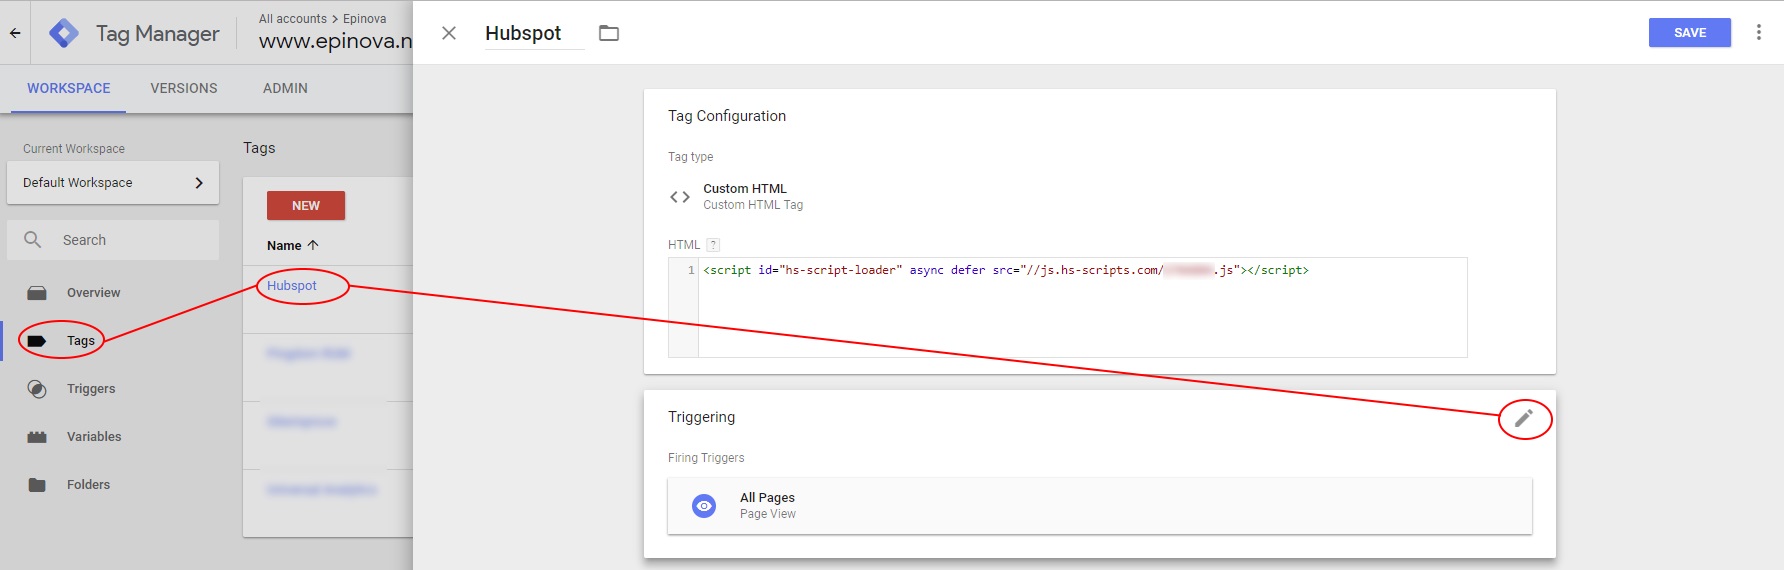 GTM applying Do Not Track exception to tag